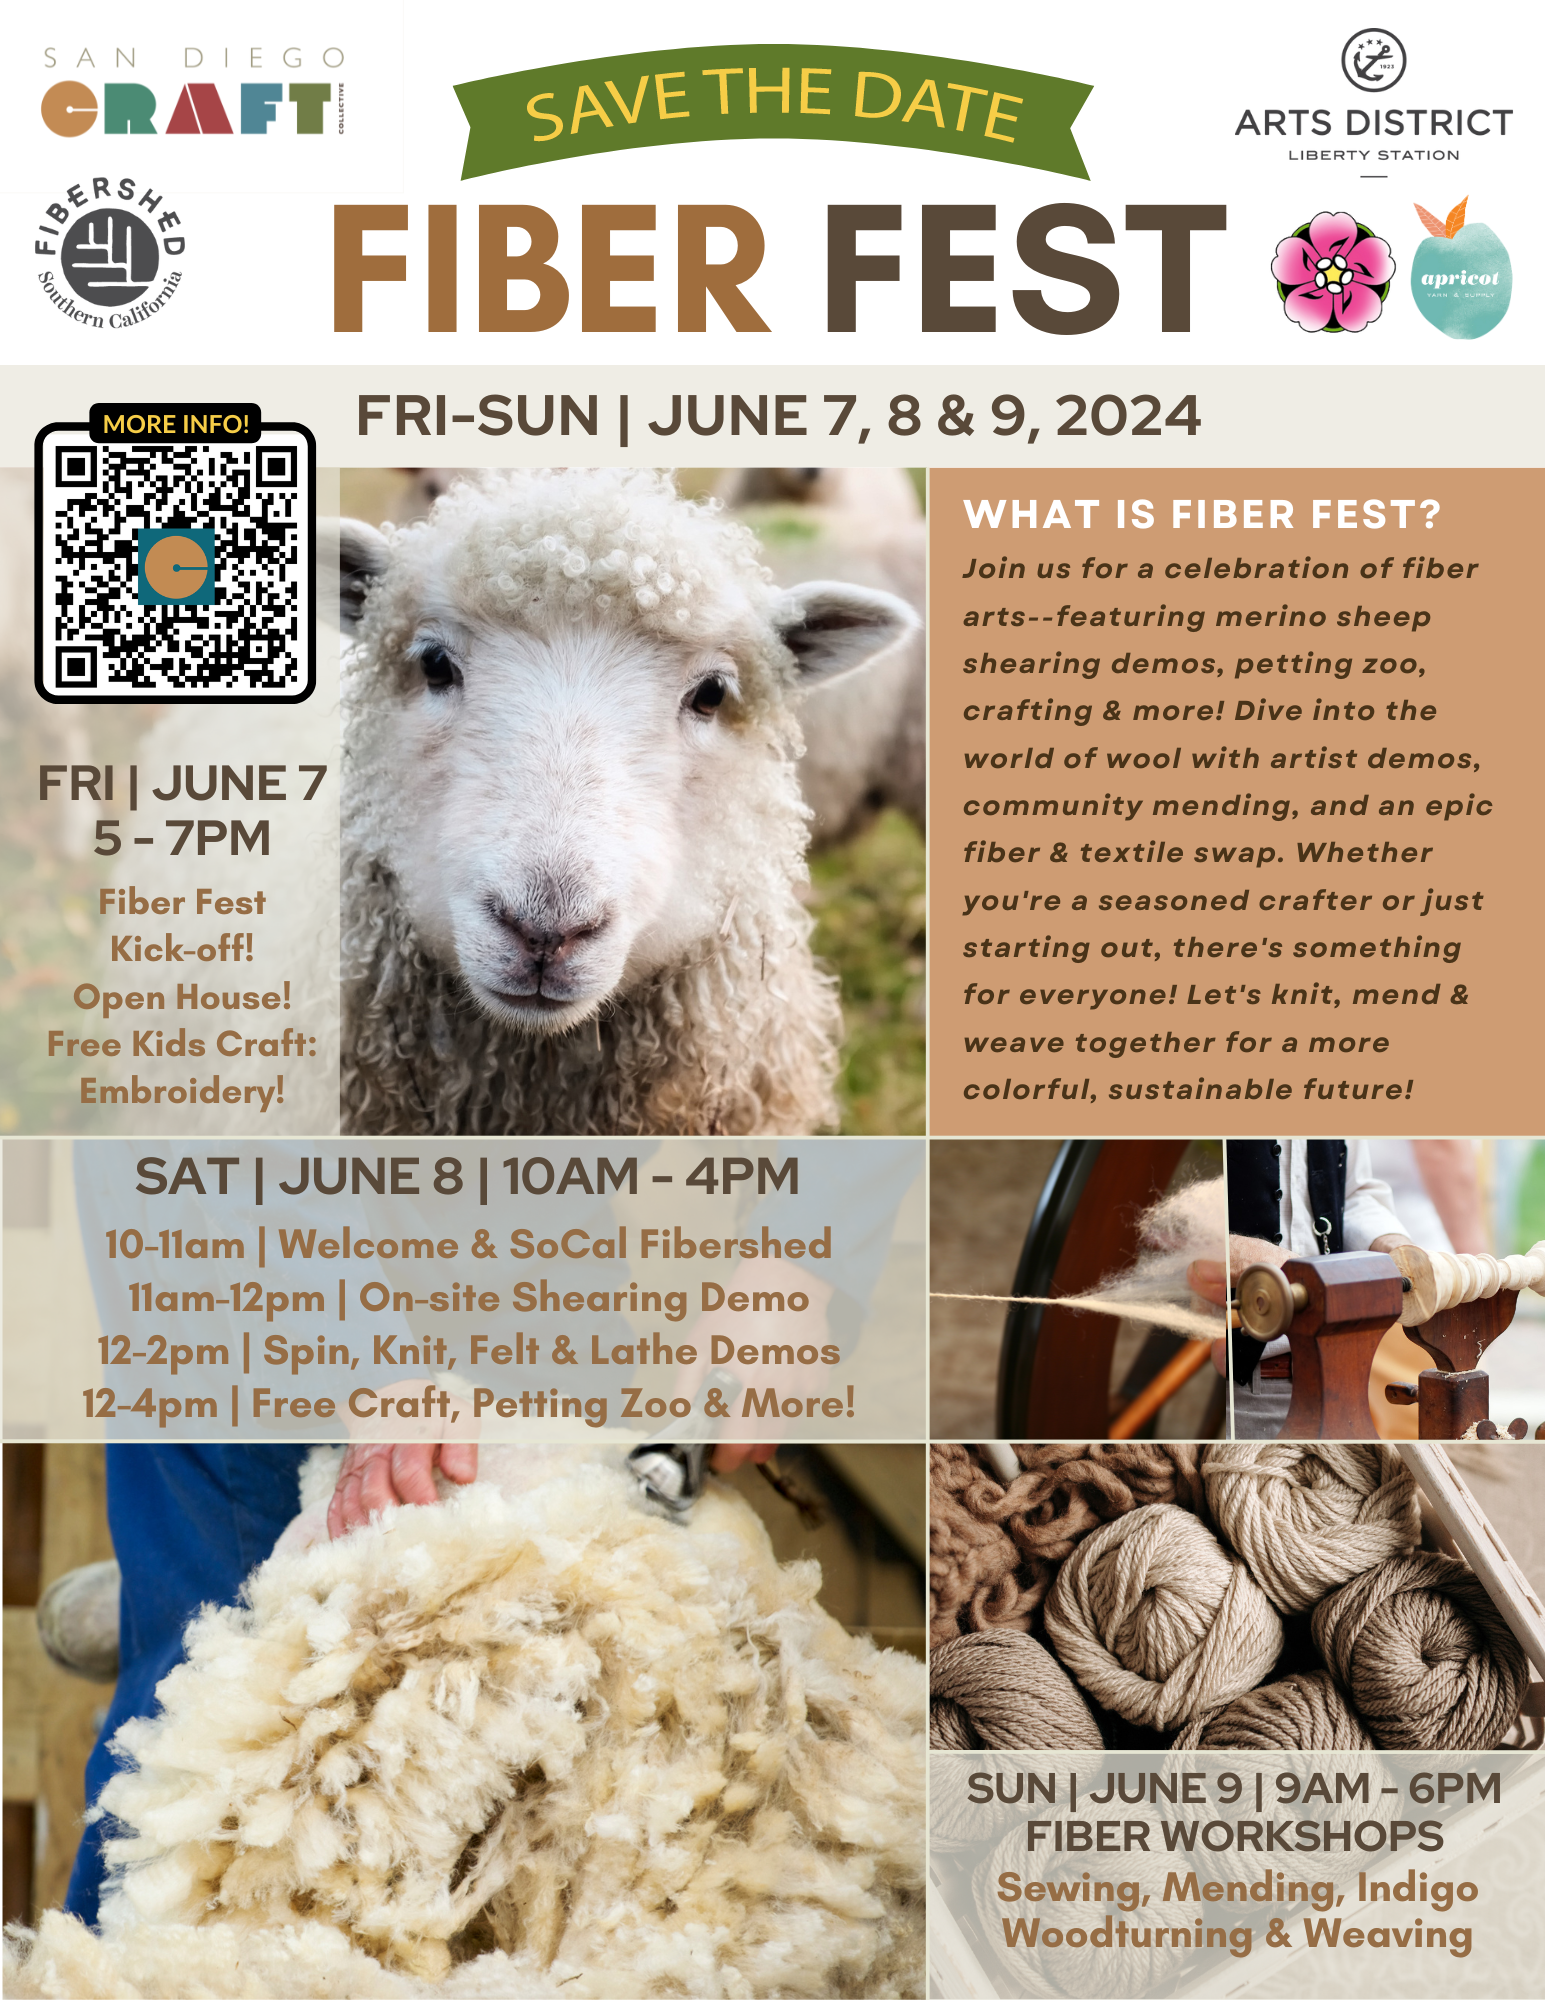 Fiber Fest this June 7, 8, 9 at San Diego Craft Collective